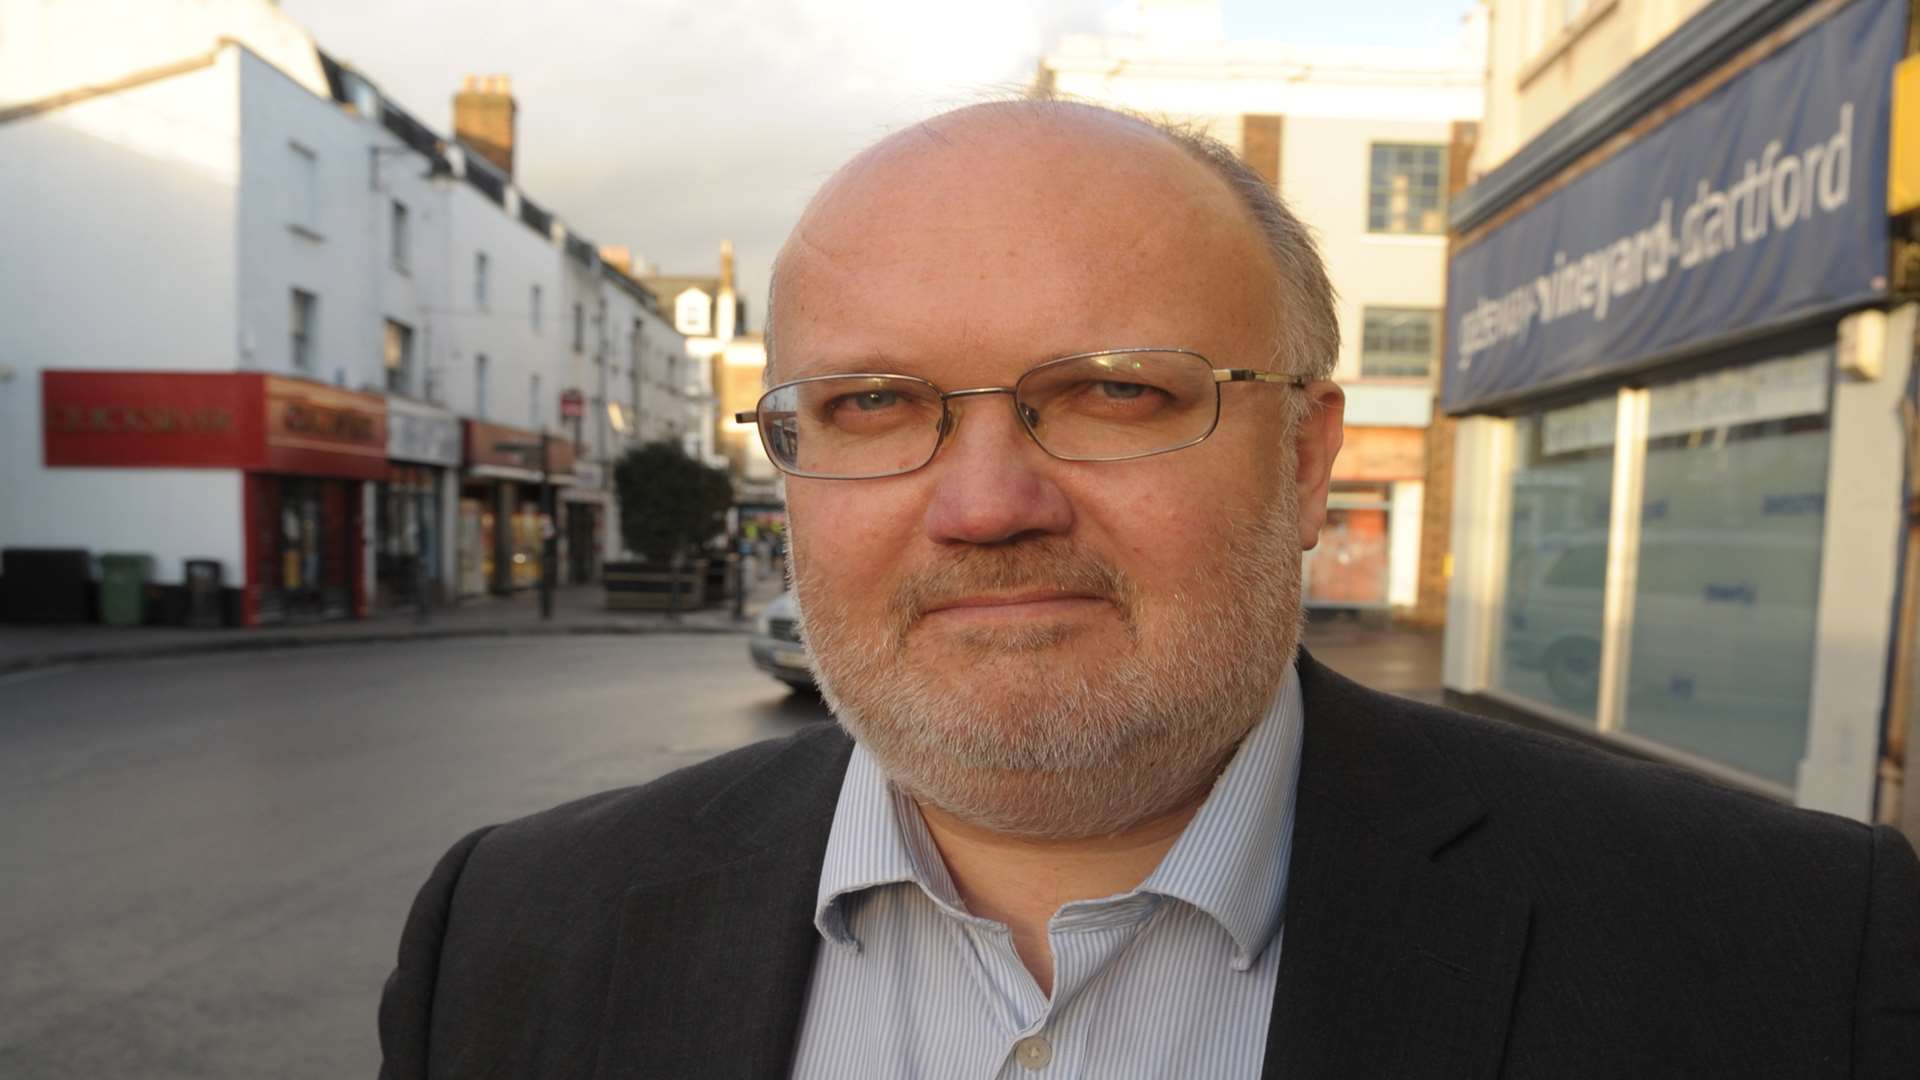 Council leader Jeremy Kite said: "Dartford Town Centre remains a very safe place to live, work and visit, and we want to keep it that way."